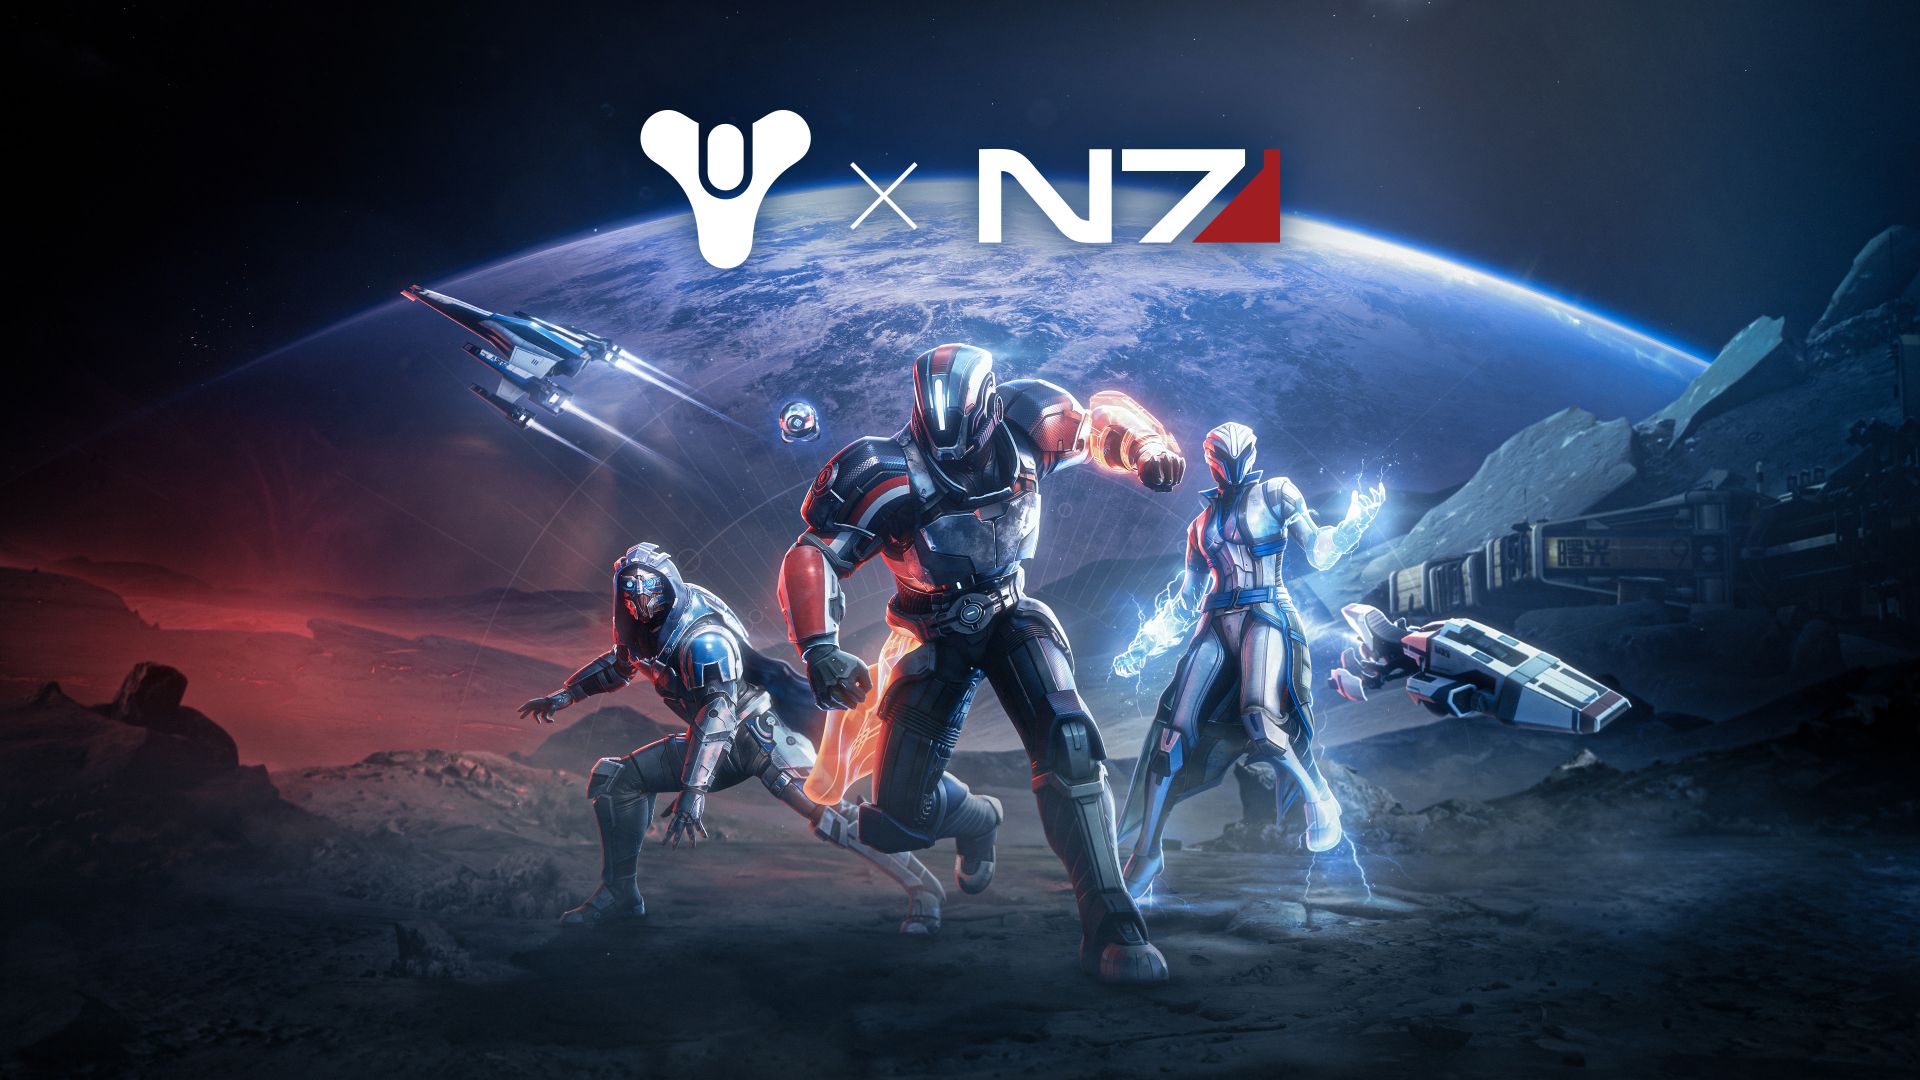 Destiny 2 x Mass Effect Collaboration Goes Live on February 13th